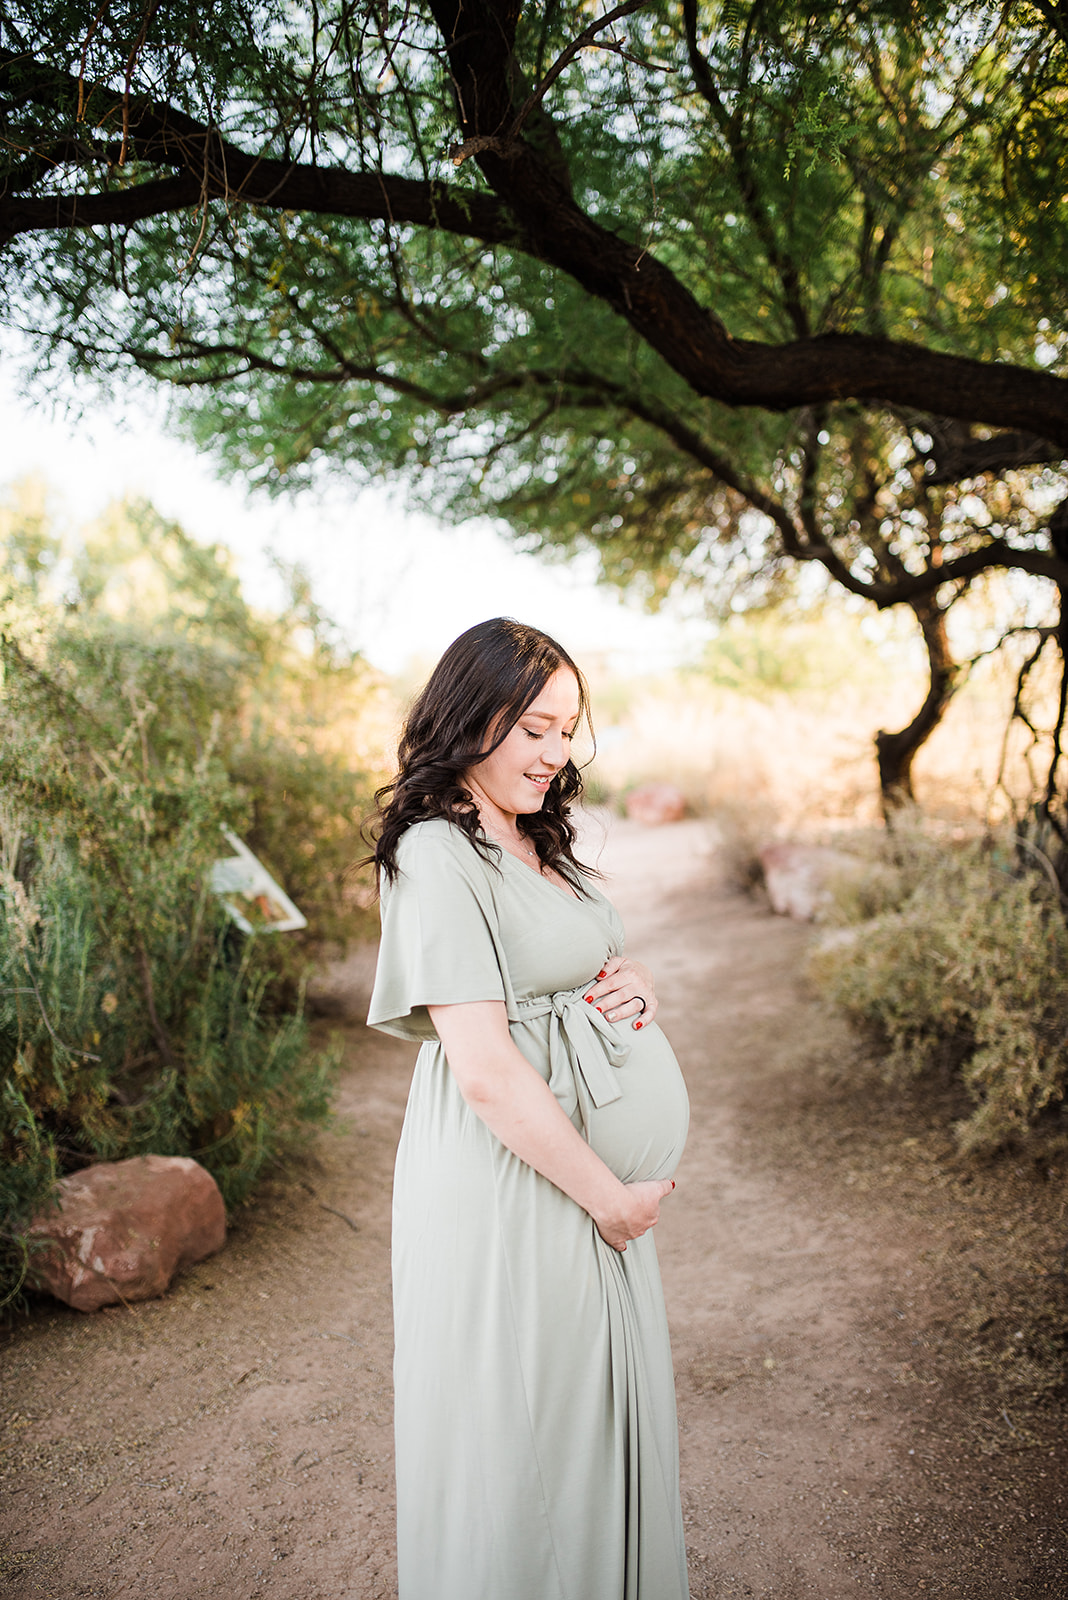 A mother to be smiles down to her bump in her hands while standing in a desert trail in a green maternity dress